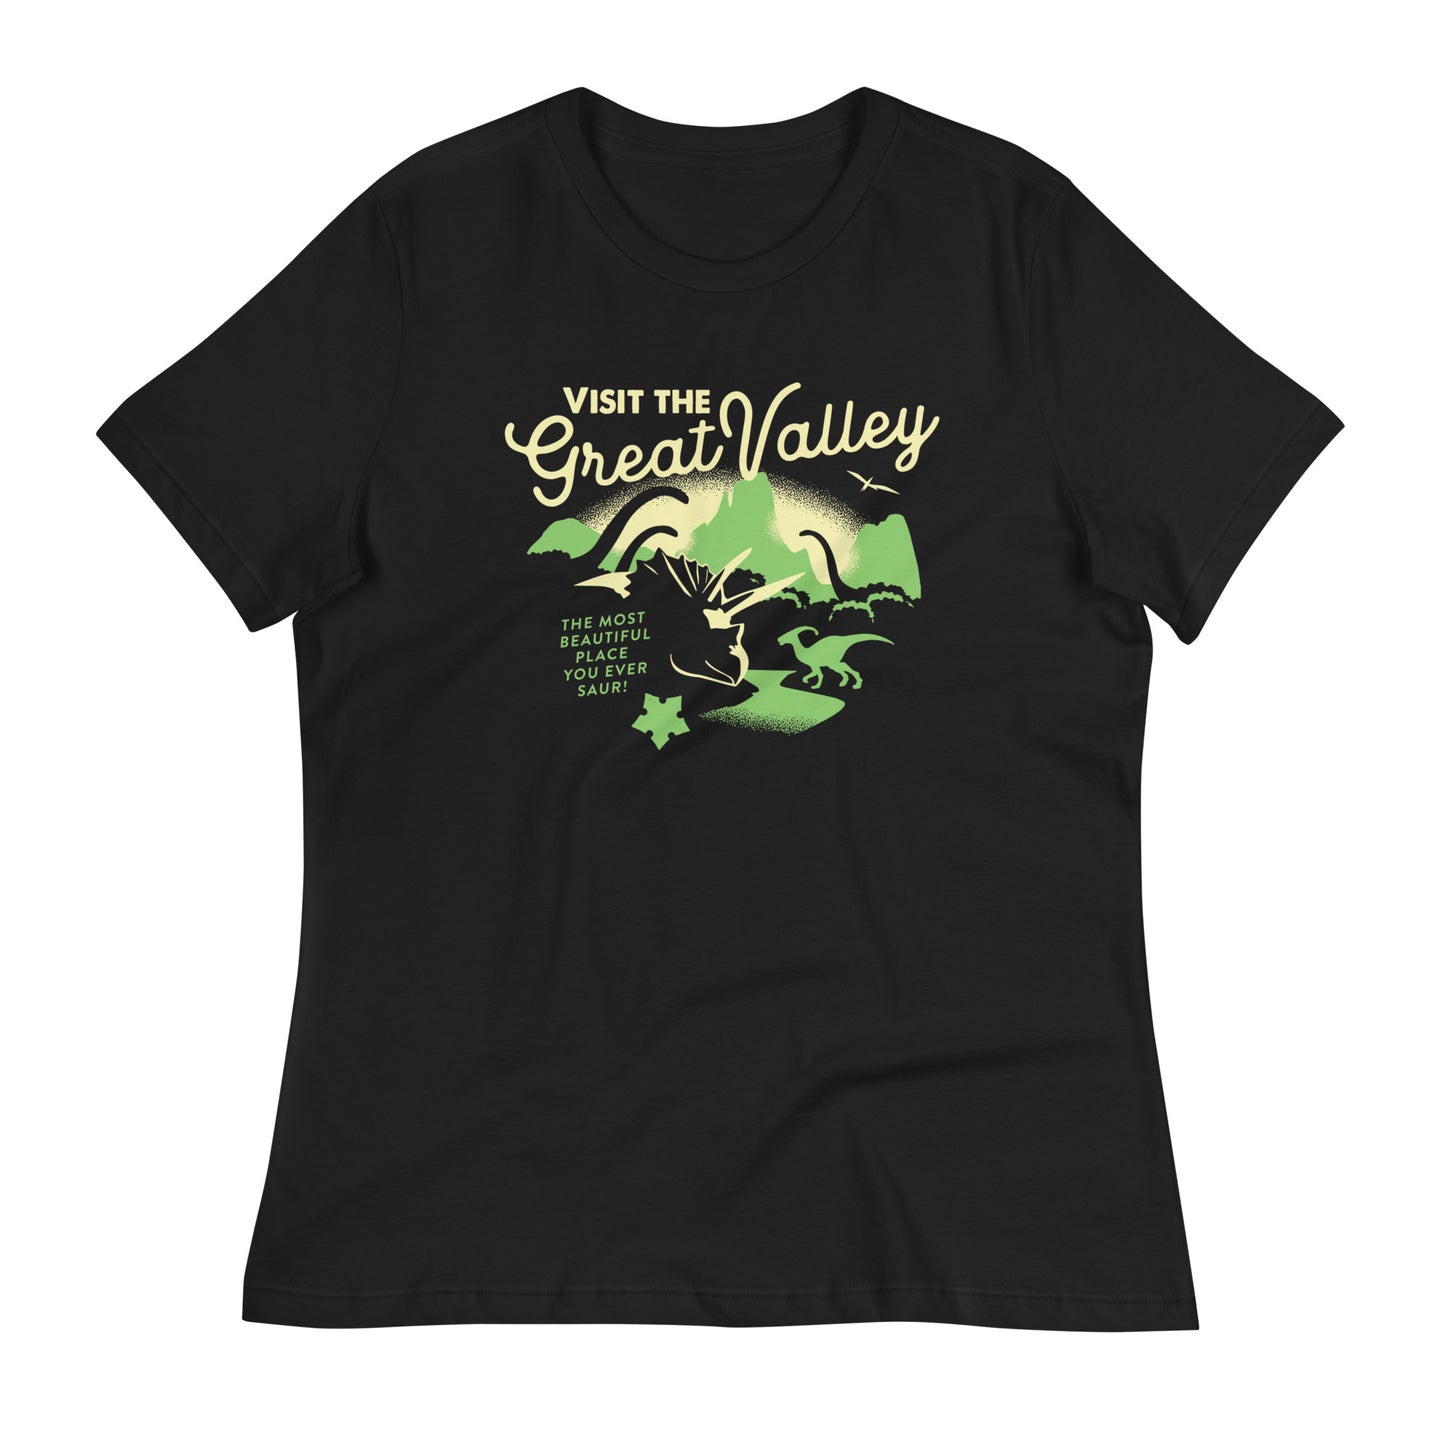 Visit The Great Valley Women's Signature Tee